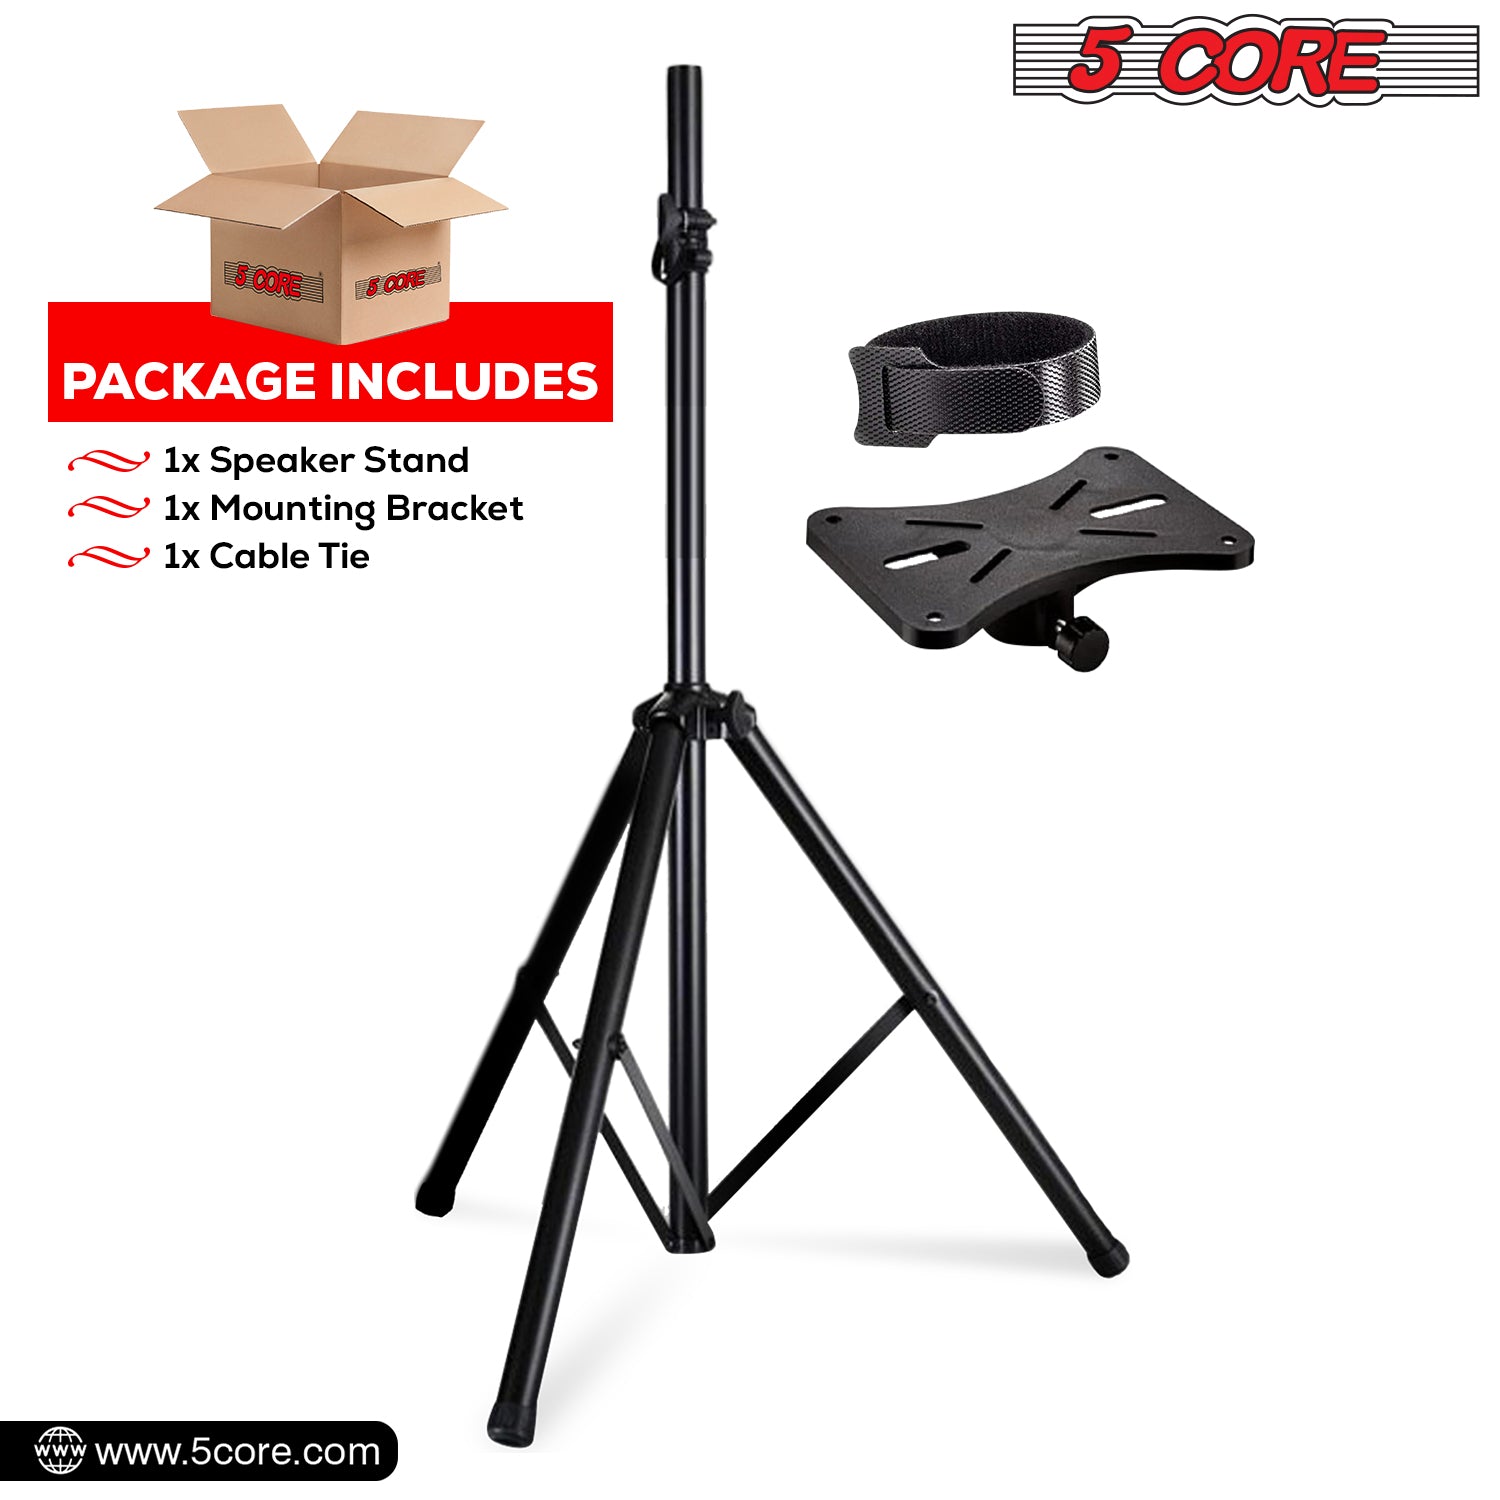 Package includes stand, cable ties, bracket